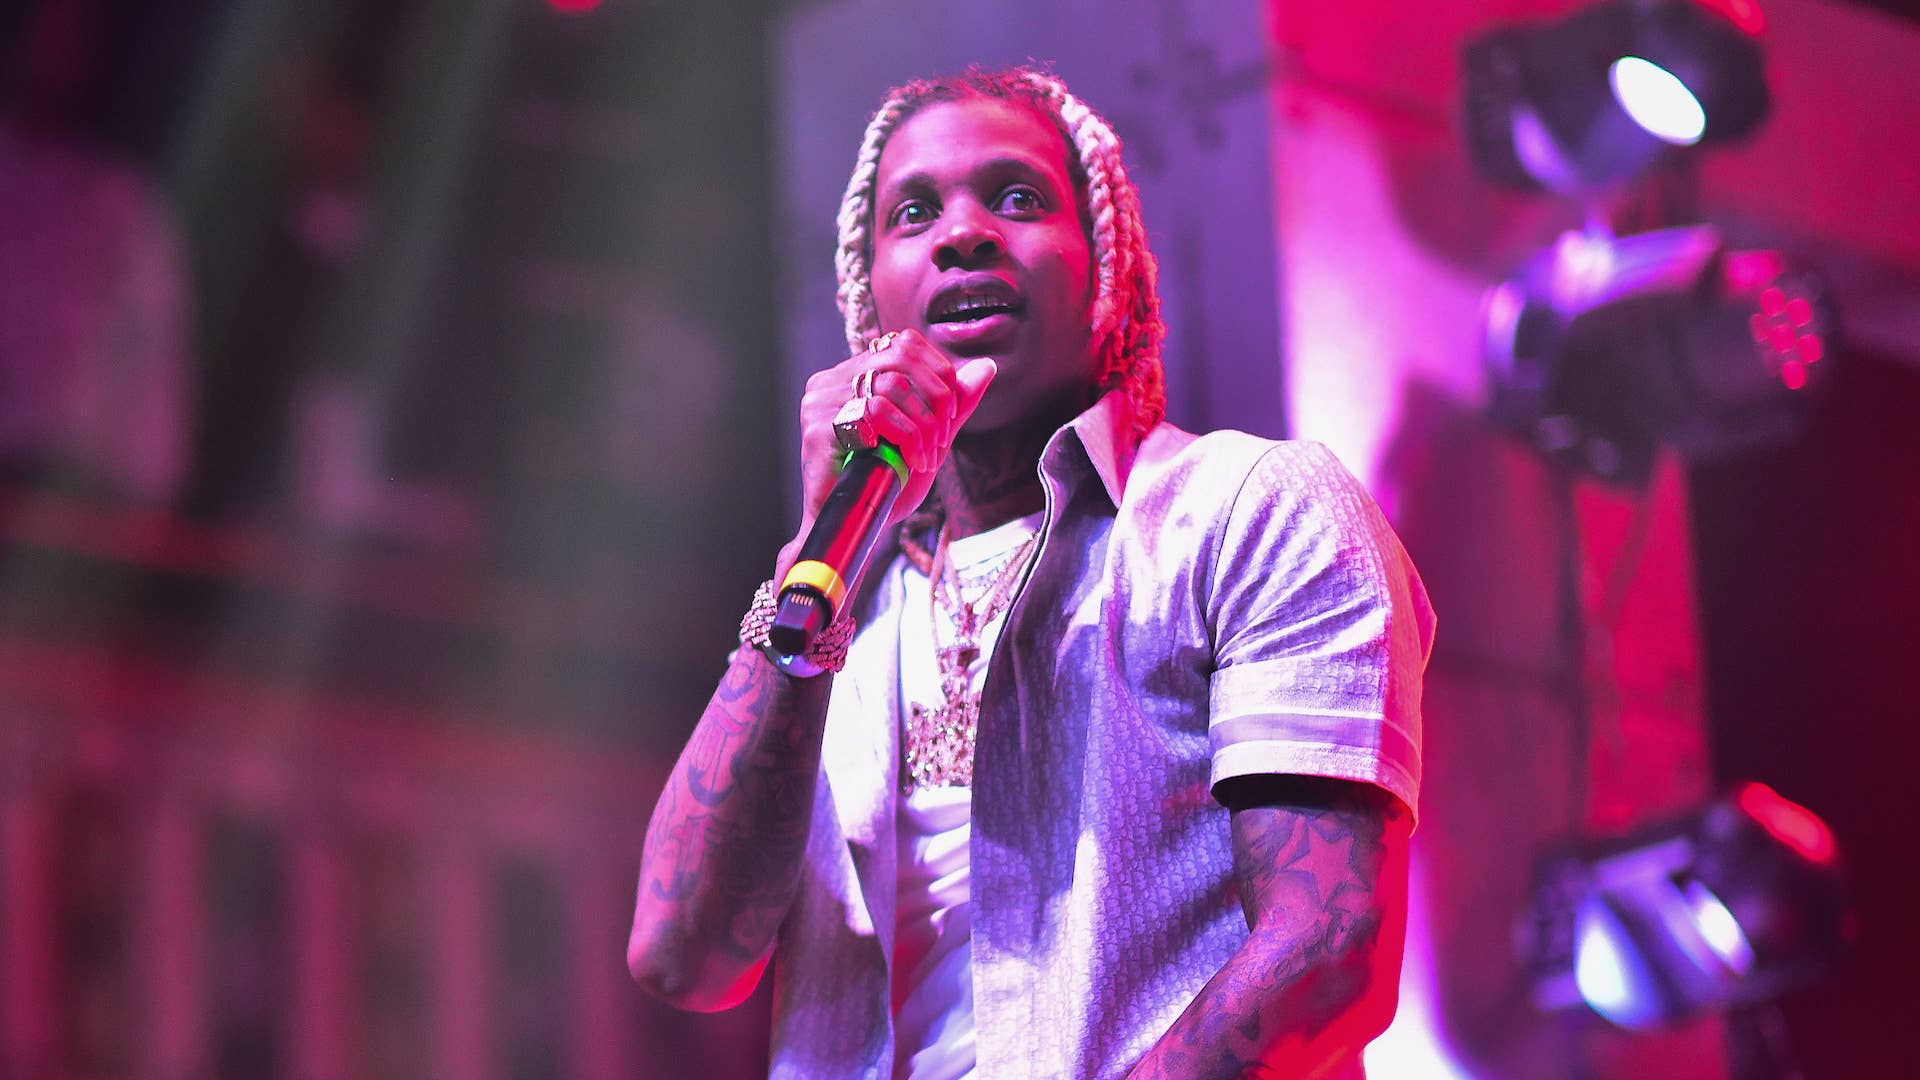 Lil Durk performs during The PTSD Tour In Concert